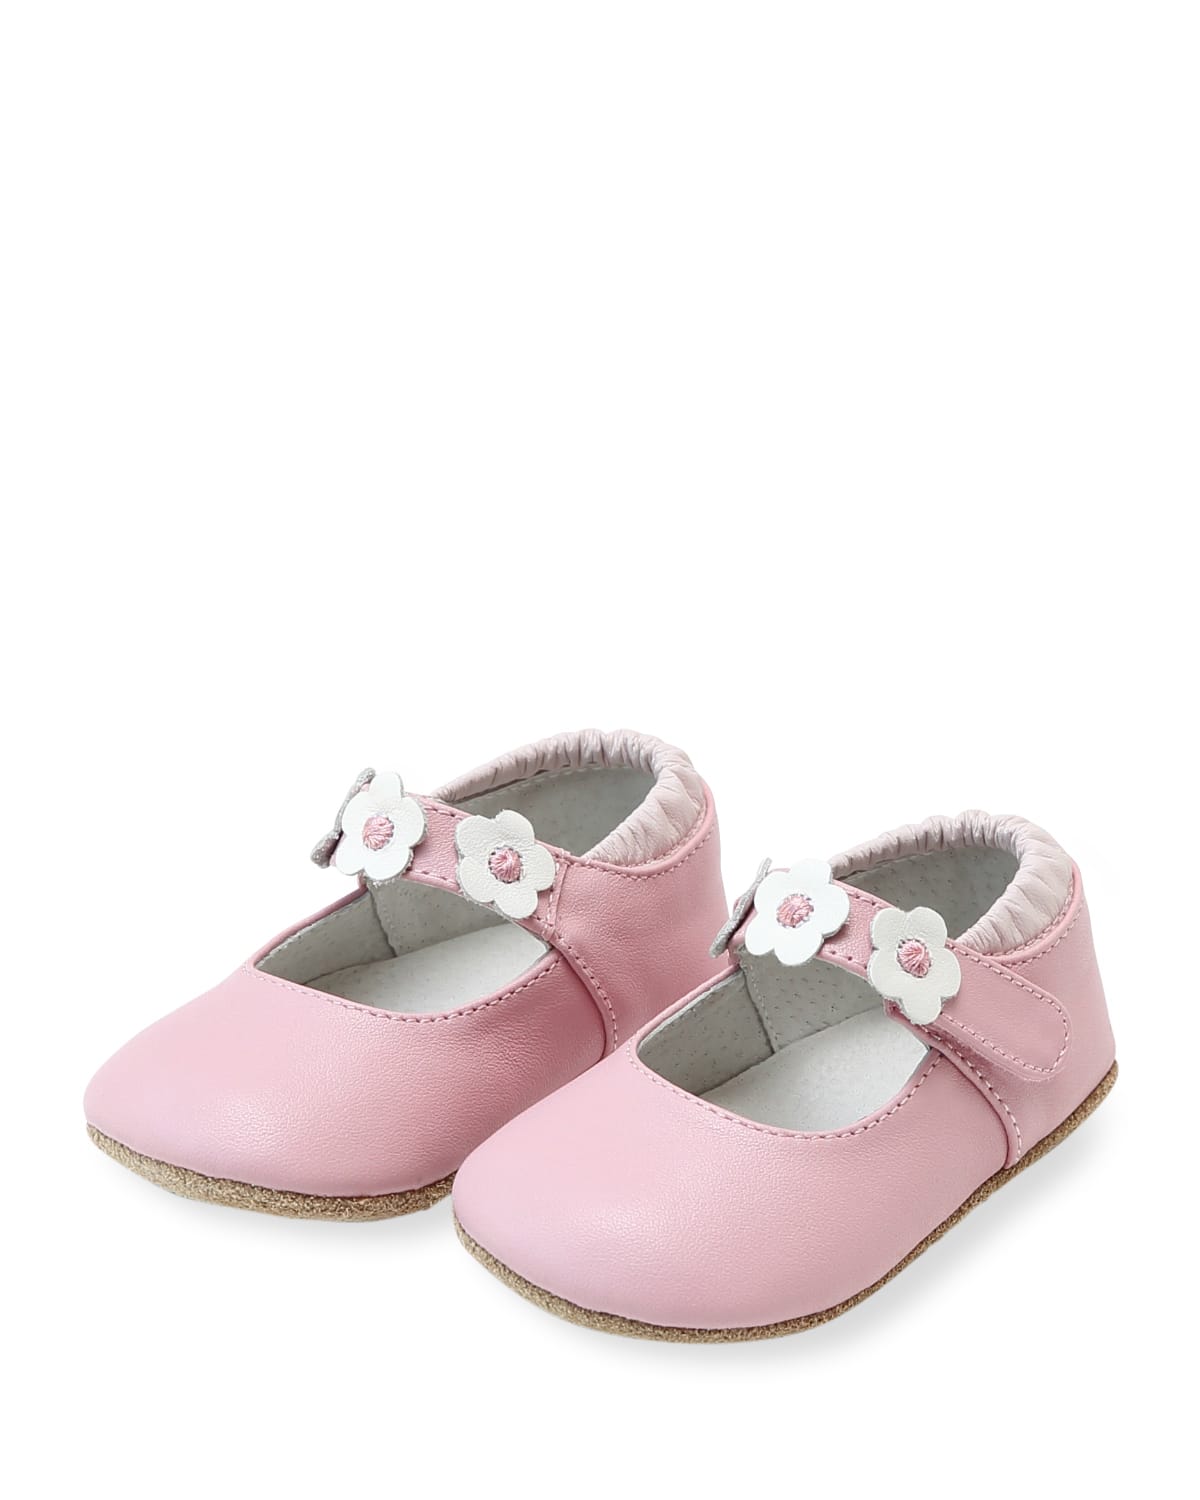 L'amour Shoes Girl's Hope Soft Leather Flower Strap Crib Mary Jane, Baby In Pink